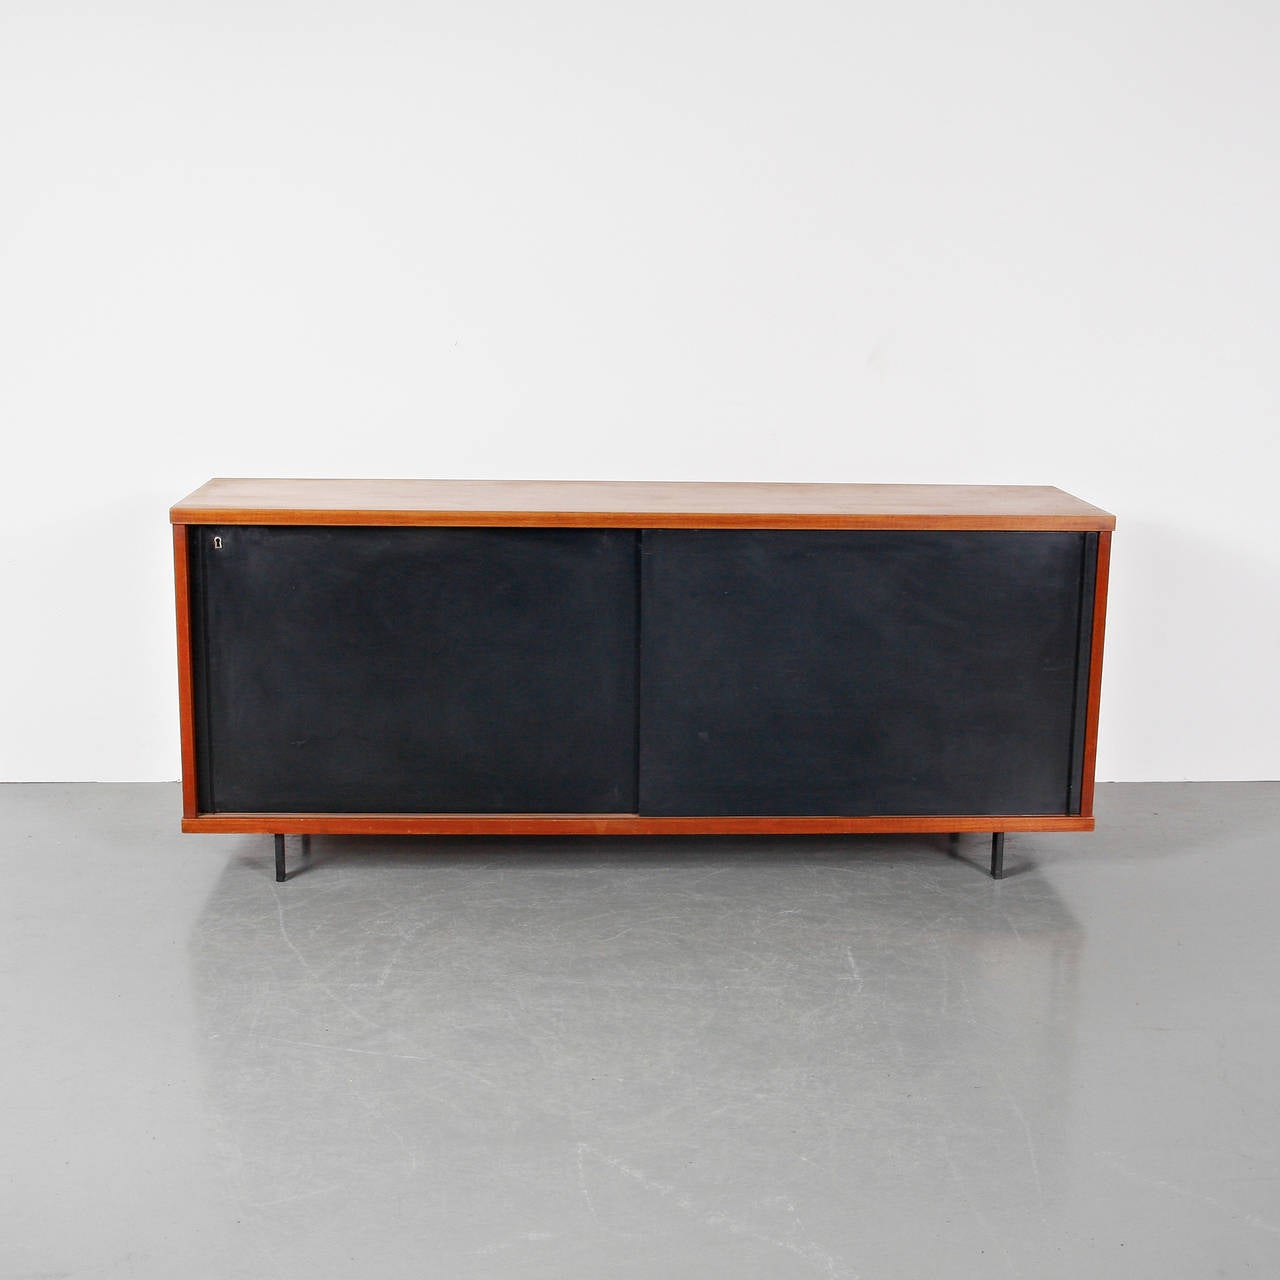 Rare sideboard, designed by Cees Braakman, circa 1950.
Manufactured by Pastoe (Netherlands).
Oak wood base and structure.

It's in excellent original condition, preserving a beautiful patina.

Cees Braakman (1917-1995) at the age of 17 he went